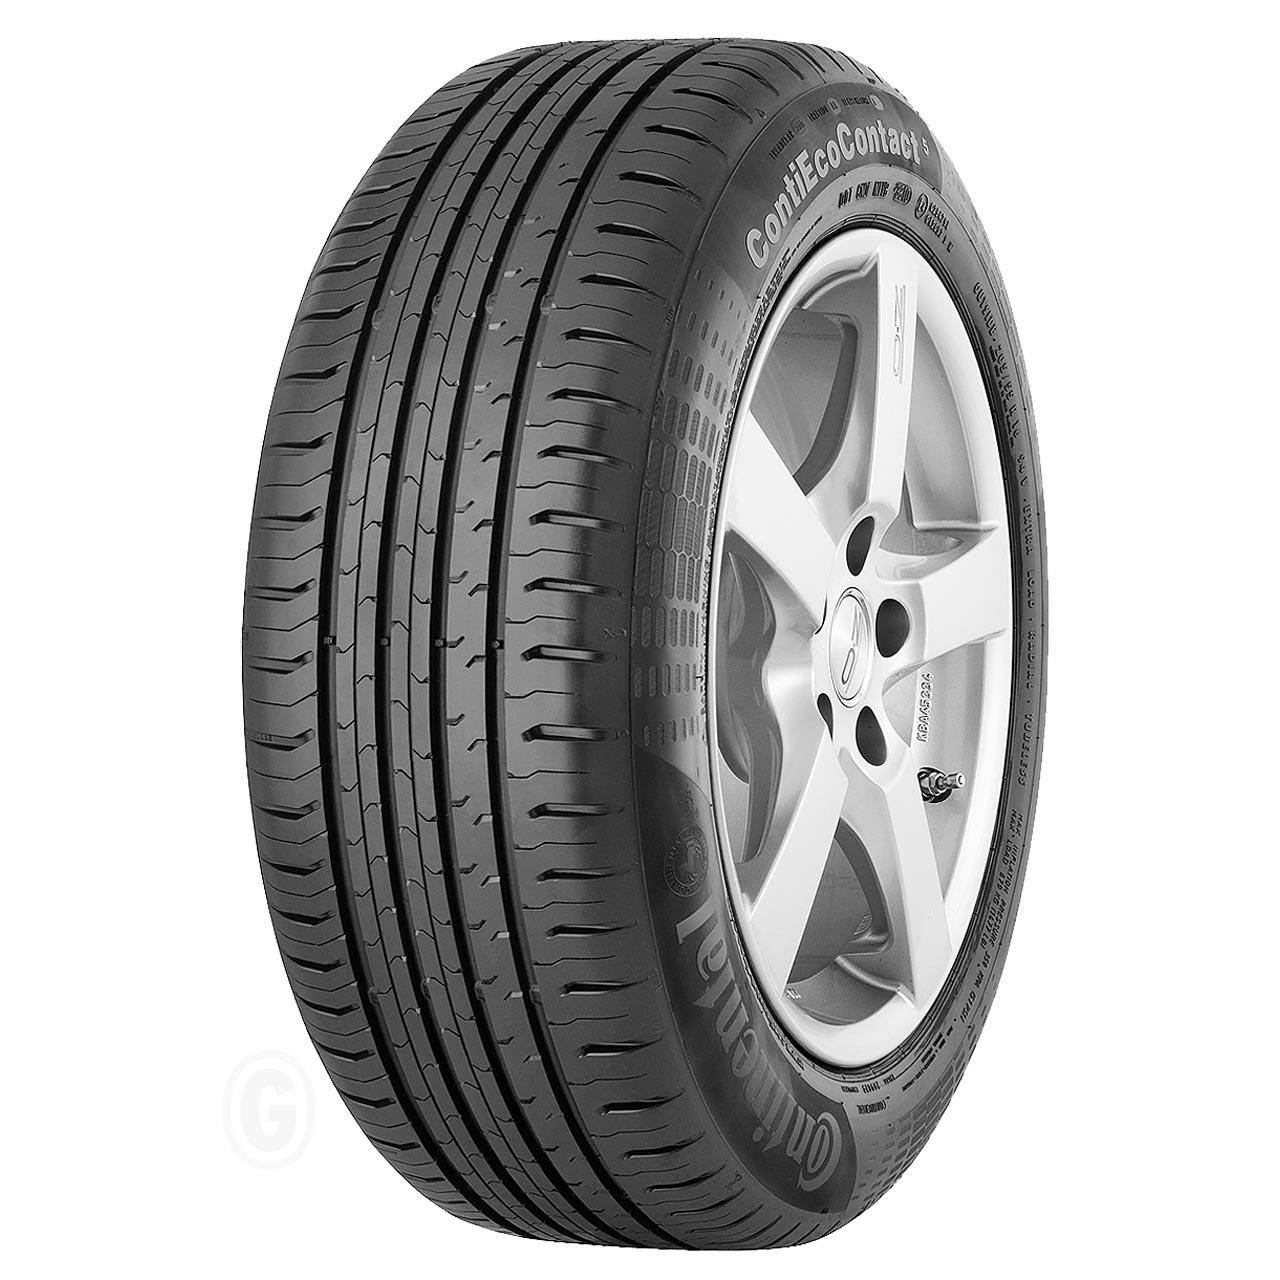 Continental CONTIECOCONTACT 5 165/60R15 81H XL TOY